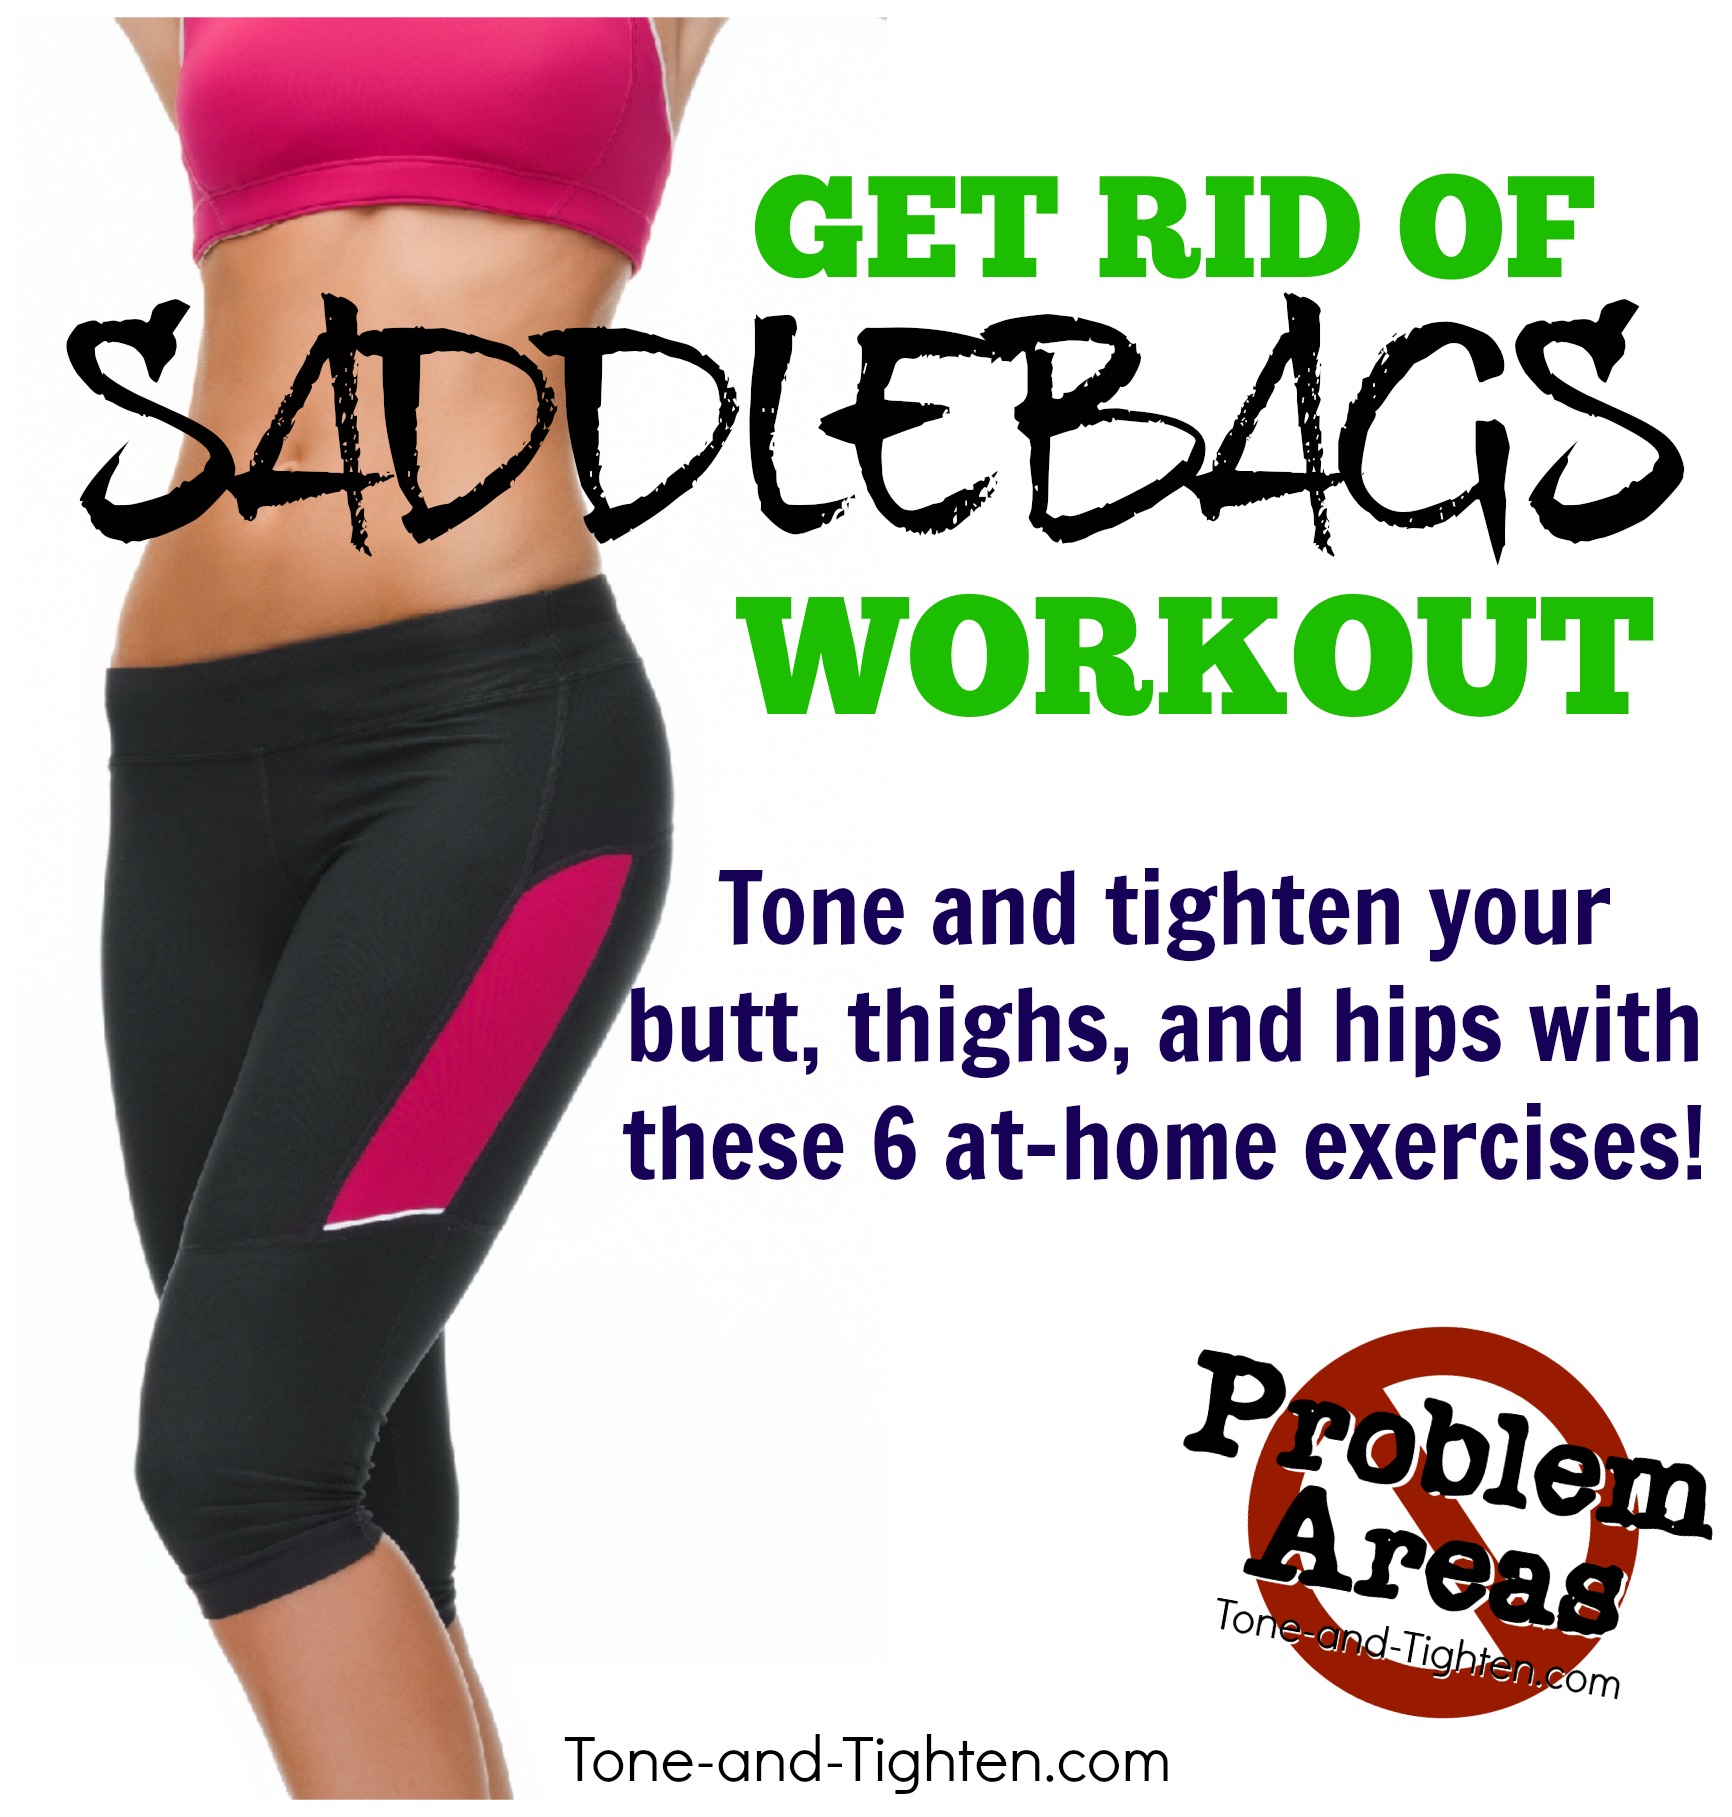 Best Workout for Saddlebags – “Problem Areas” series